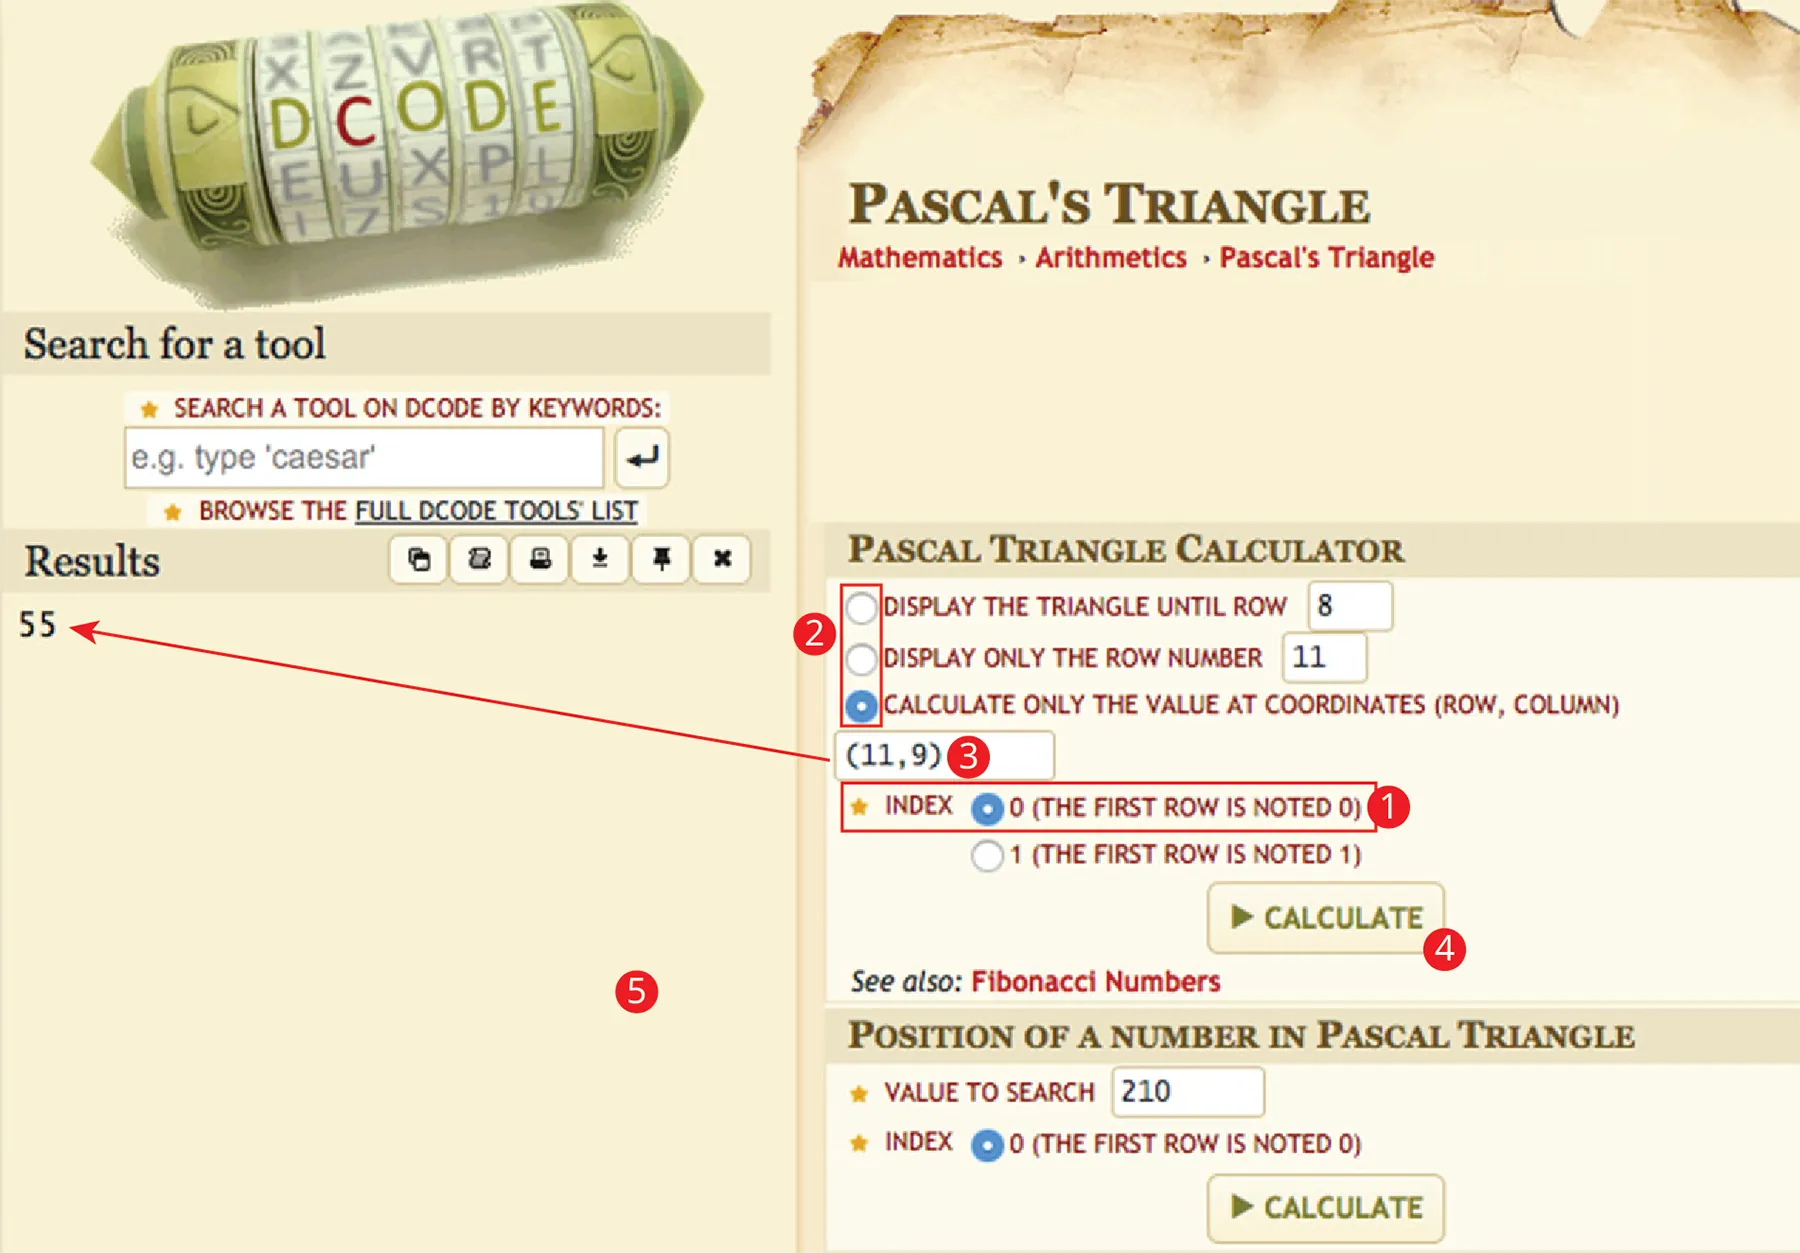 A screenshot of Pascal's triangle. The left section displays a search tool with results: 55. This section is numbered 5. The right section shows two sections titled, Pascal triangle calculator and Position of a number in Pascal triangle. The first section displays the following information. Display the triangle until line: 8. Display only line number: 11. Calculate only the value at coordinates (line, column): (11, 9) (numbered 3). These 3 options are numbered 2. Index: 0, the first row is noted 0. This is numbered 1. Calculate button is present. This is numbered 4. The second section shows the value to search set to 210. Index: 0, the first row is noted 0. Calculate button is present.